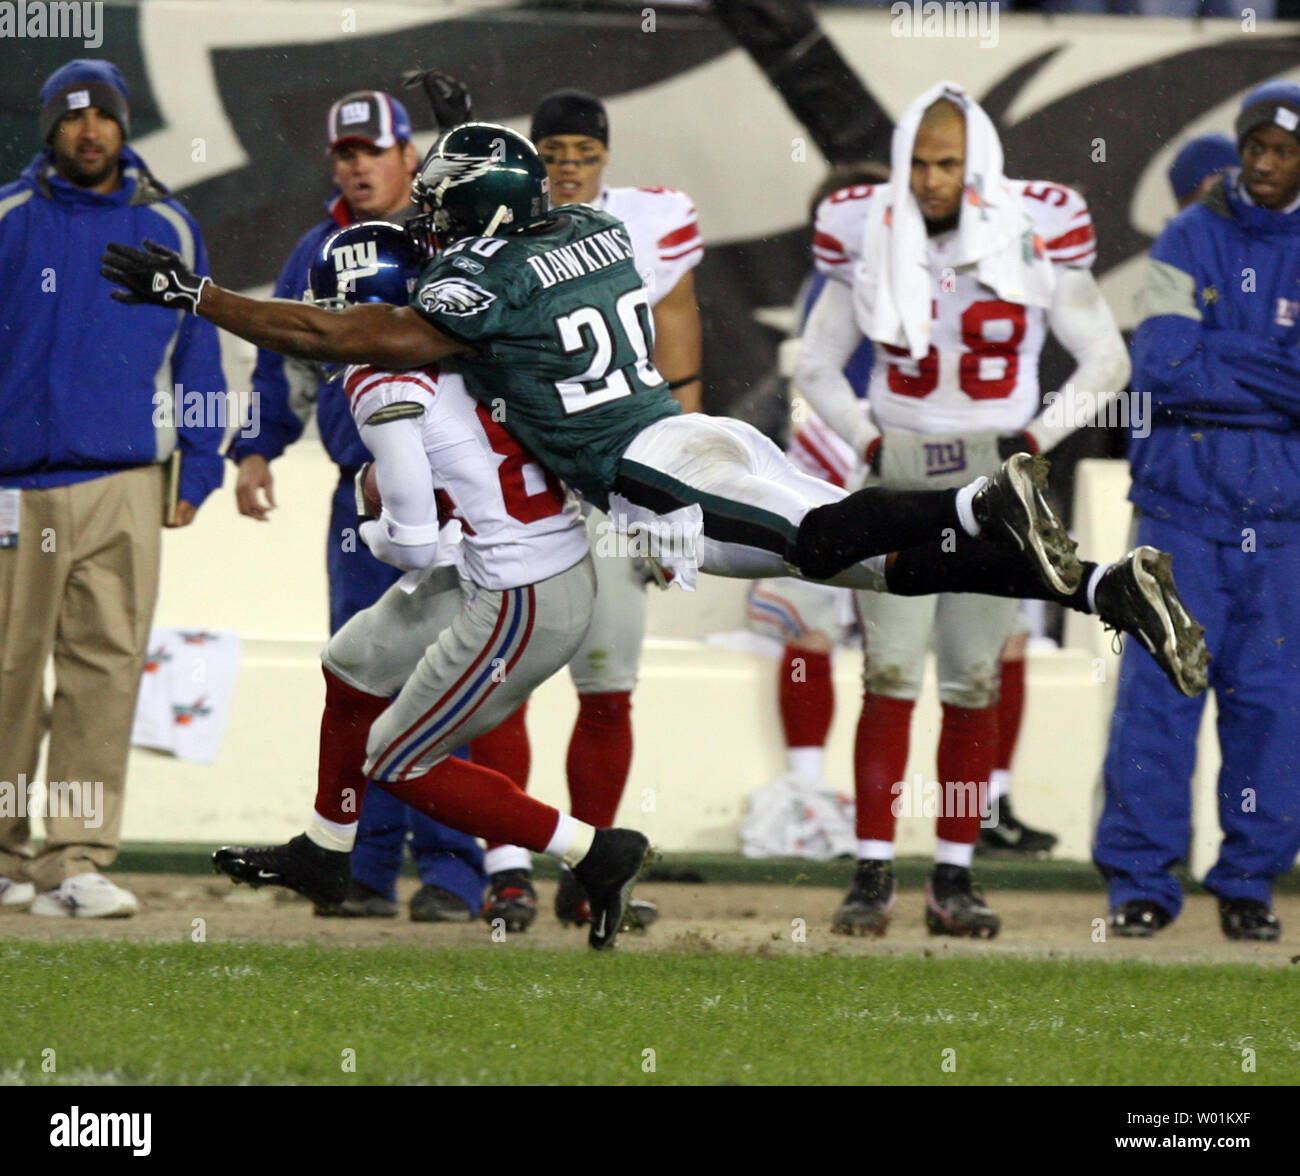 Philadelphia's Brian Dawkins (20) makes a flying tackle on New York Giants wide receiver Tim Carter on the Philadelphia 34-yard line during fourth quarter NFC Wildcard playoff action at Lincoln Financial Field in Philadelphia on January 7, 2006.    (UPI Photo/John Anderson) Stock Photo